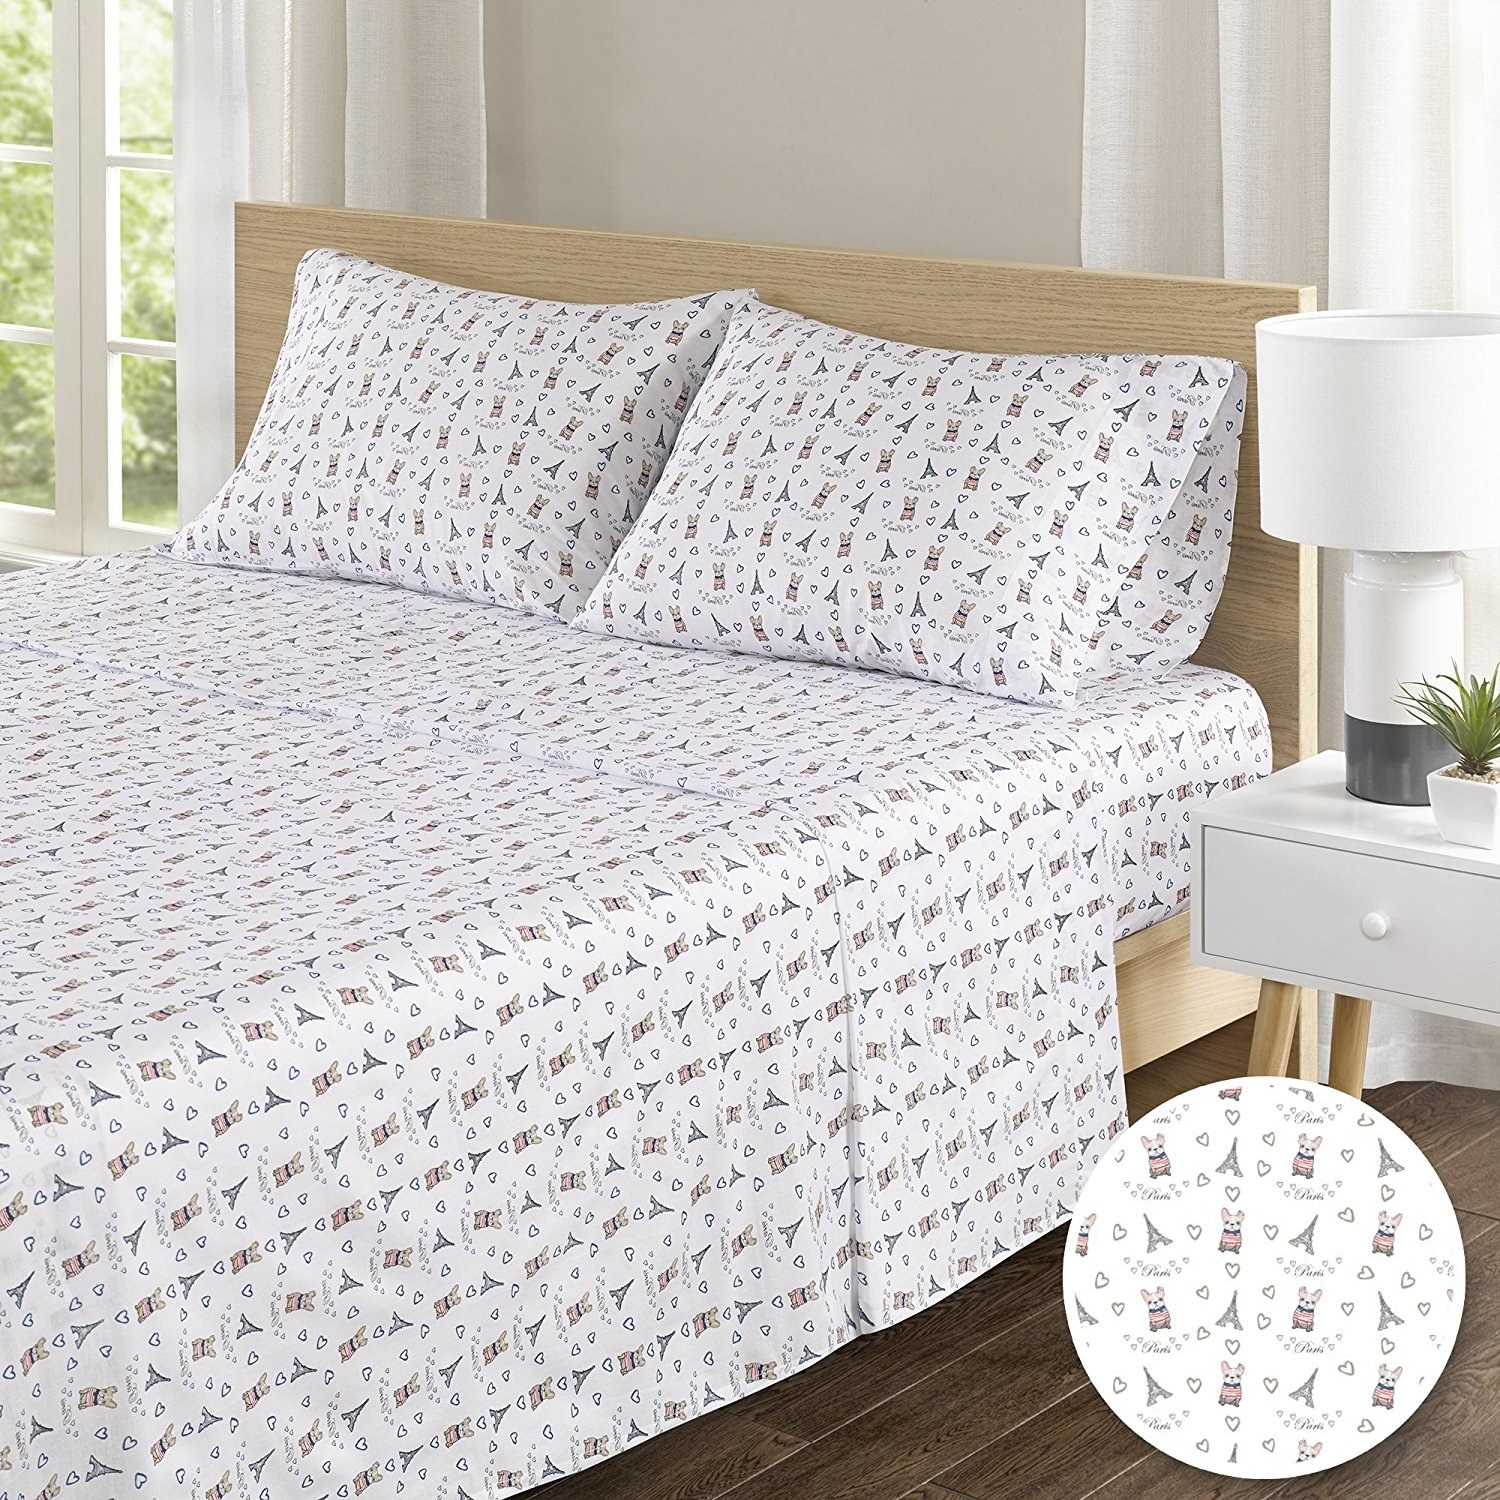 The sheets on a full-size bed in the French bulldog print.